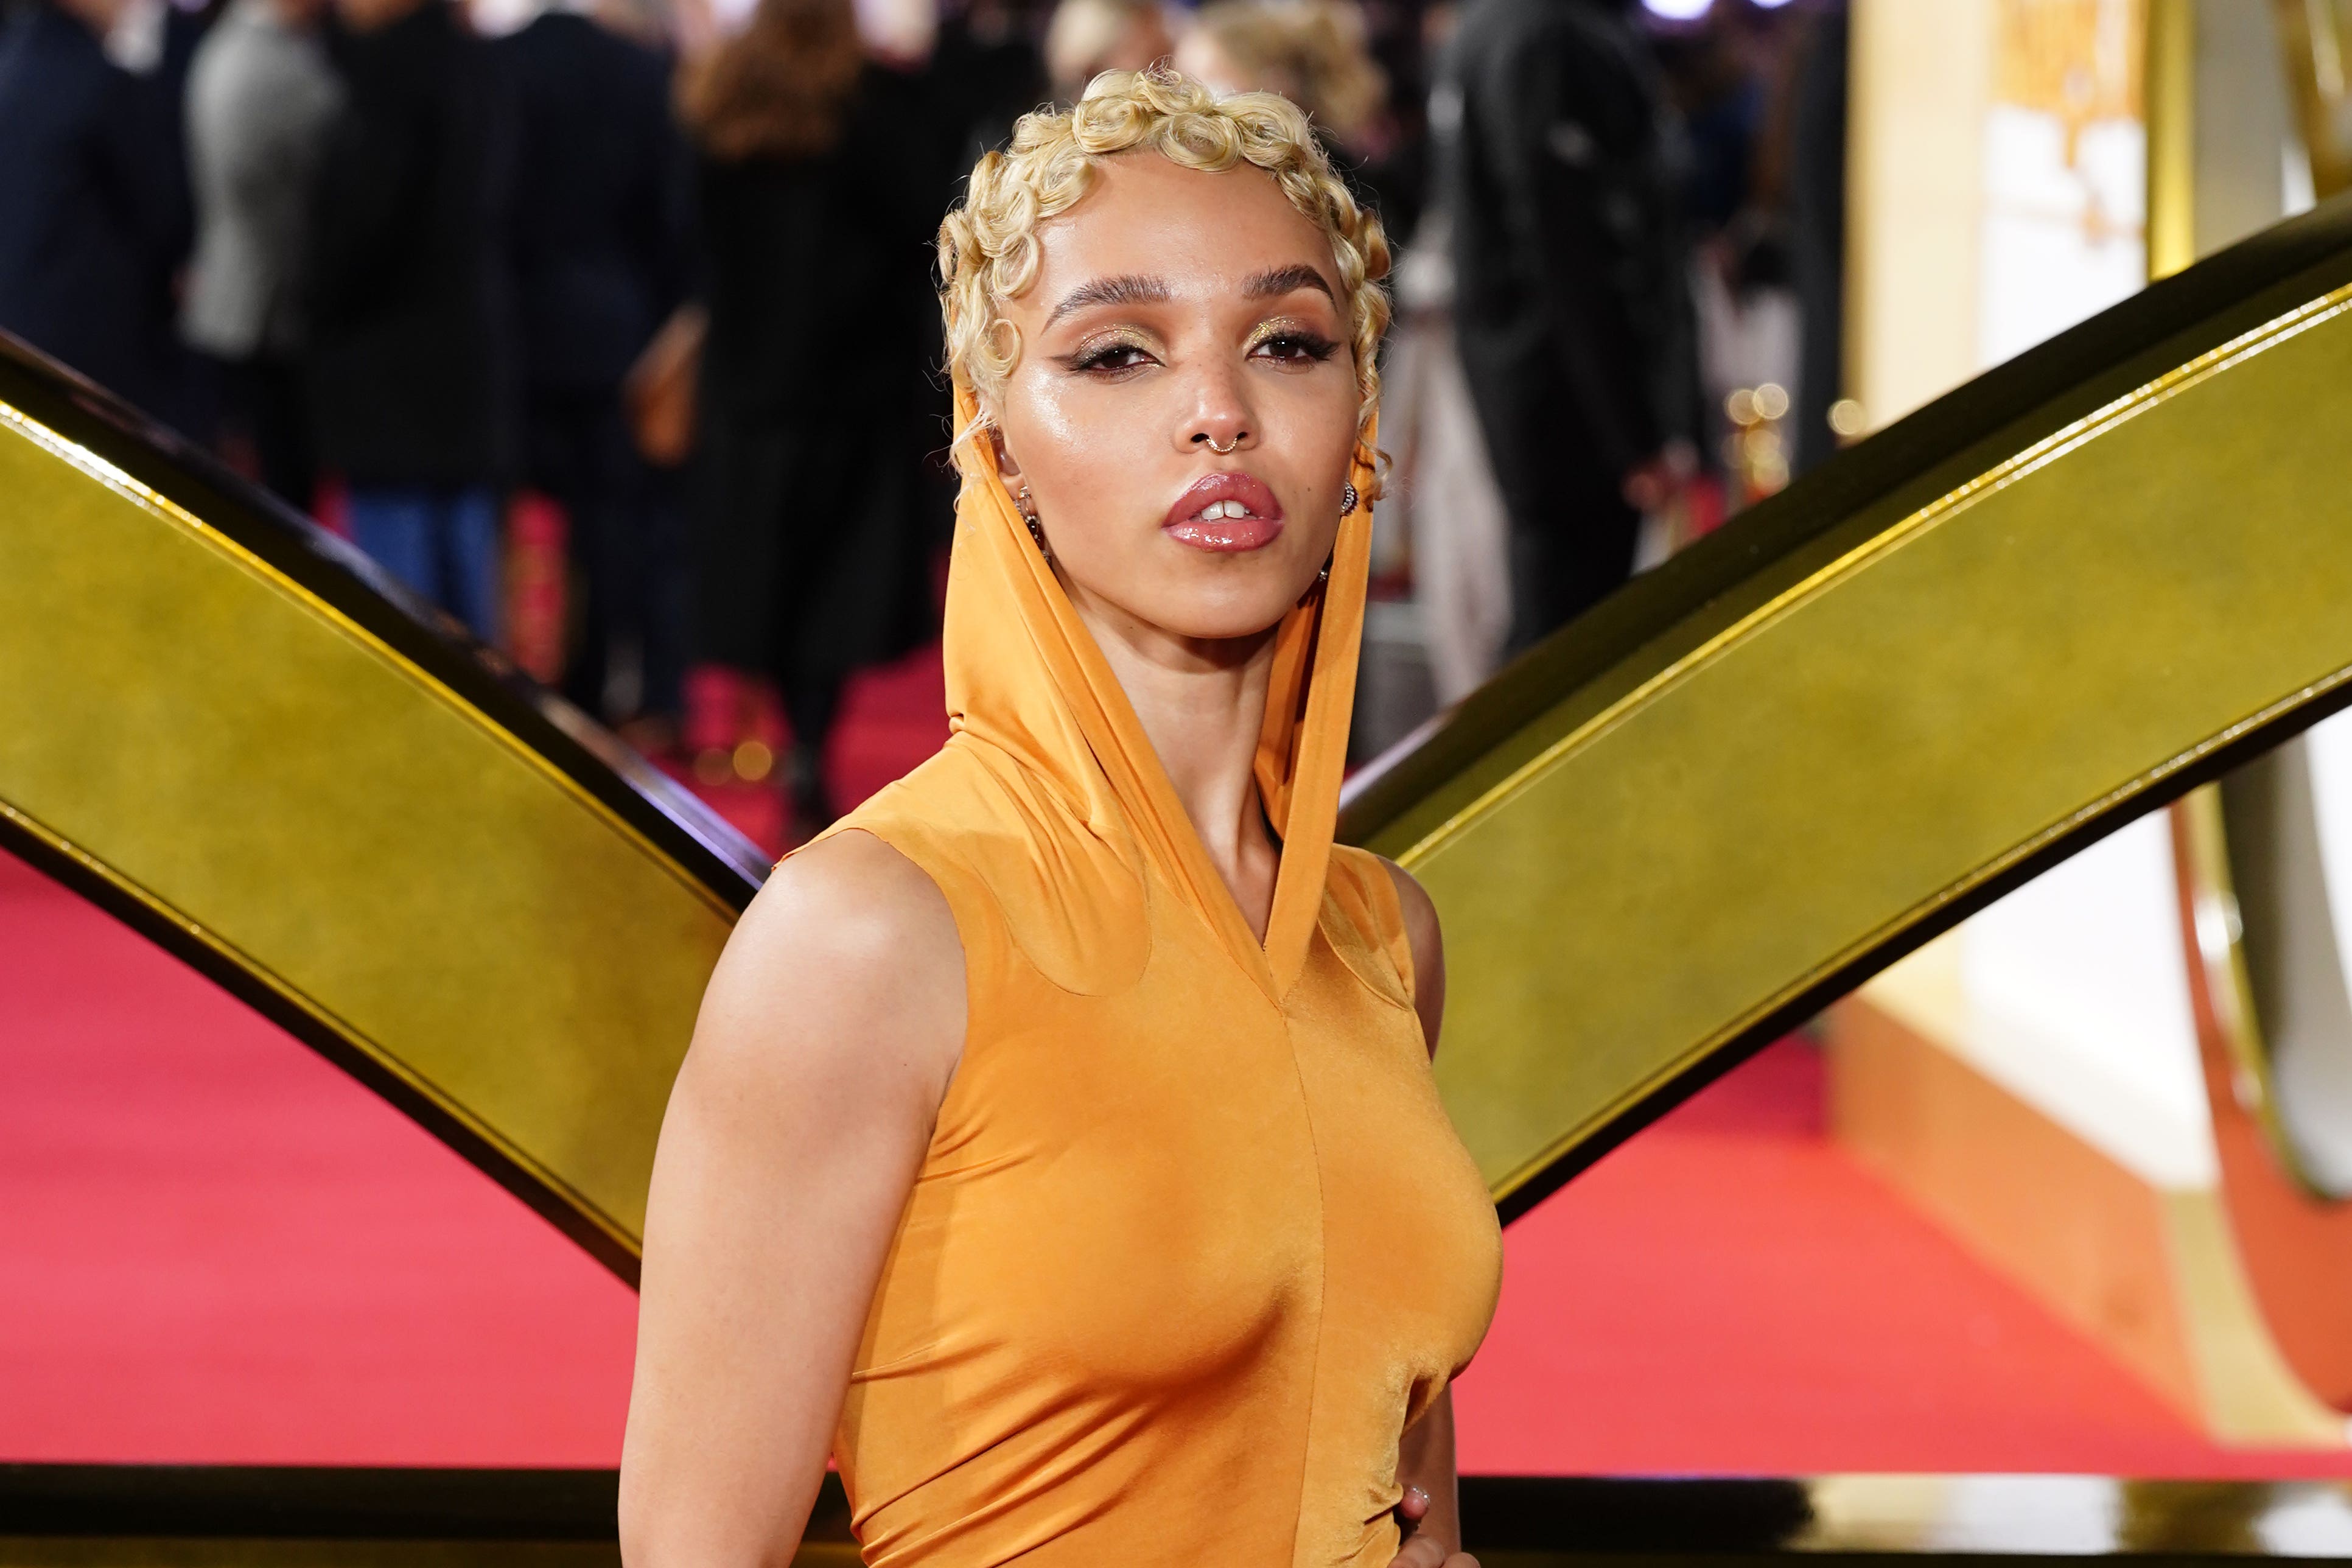 British singer FKA twigs hit out over ‘double standards’ after her Calvin Klein poster was banned over complaints it objectified women (Ian West/PA)